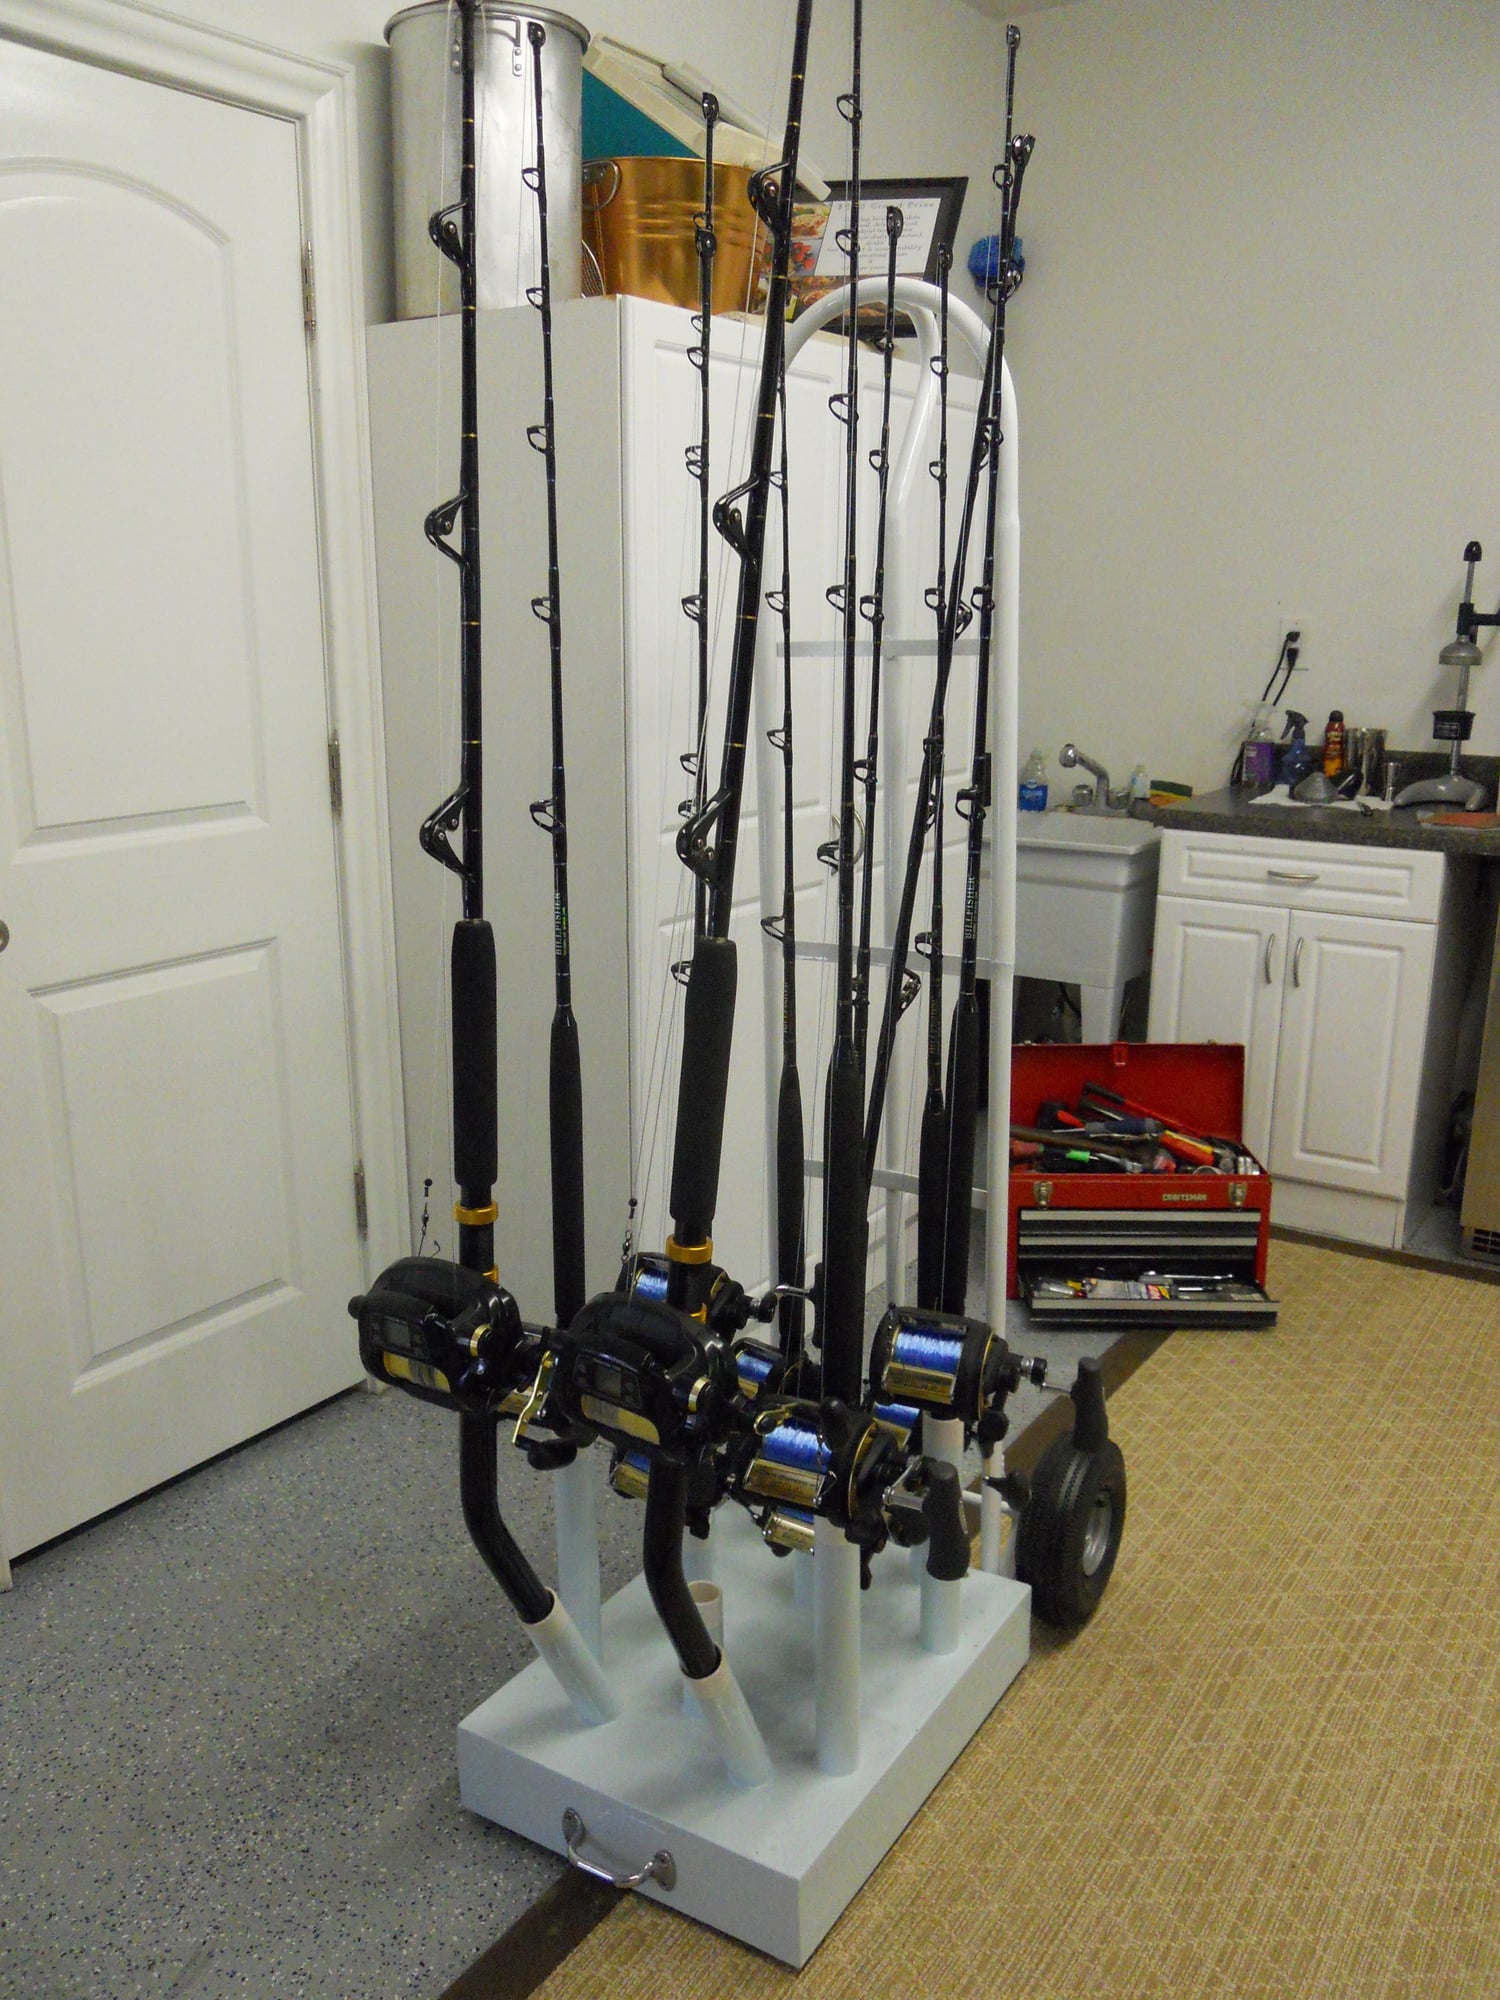 How do you store your rods? - The Hull Truth - Boating and Fishing Forum